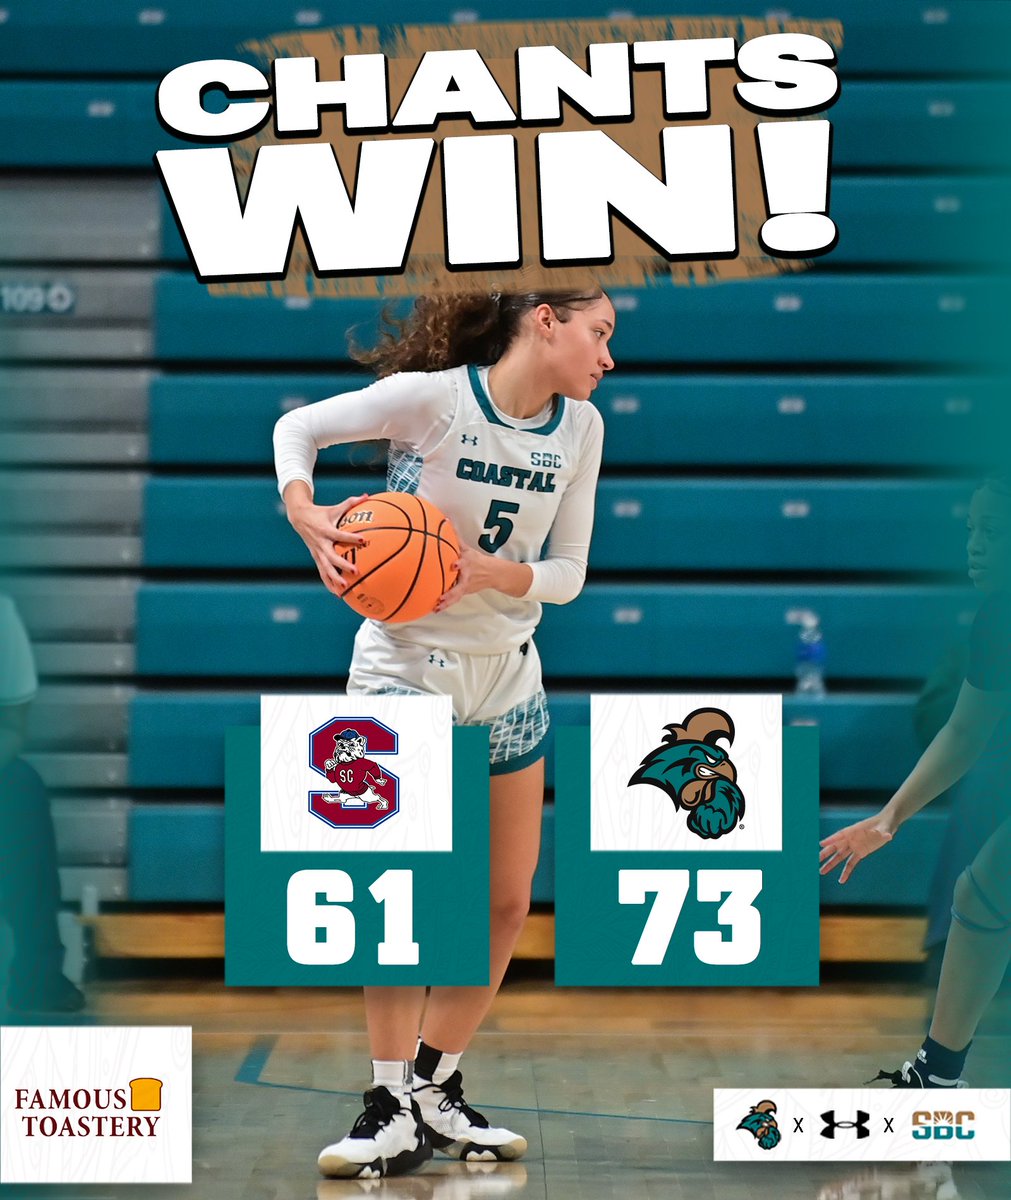 FINAL | COASTAL 73, SC STATE 61 @baller4lifeeeee with 29 to lead our offense with @alanciaramsey (17 pts, 16 rbds) & @kailacange (11 pts, 11 rbds) adding double-doubles. #TEALNATION | #CHANTSUP | #SunBeltWBB